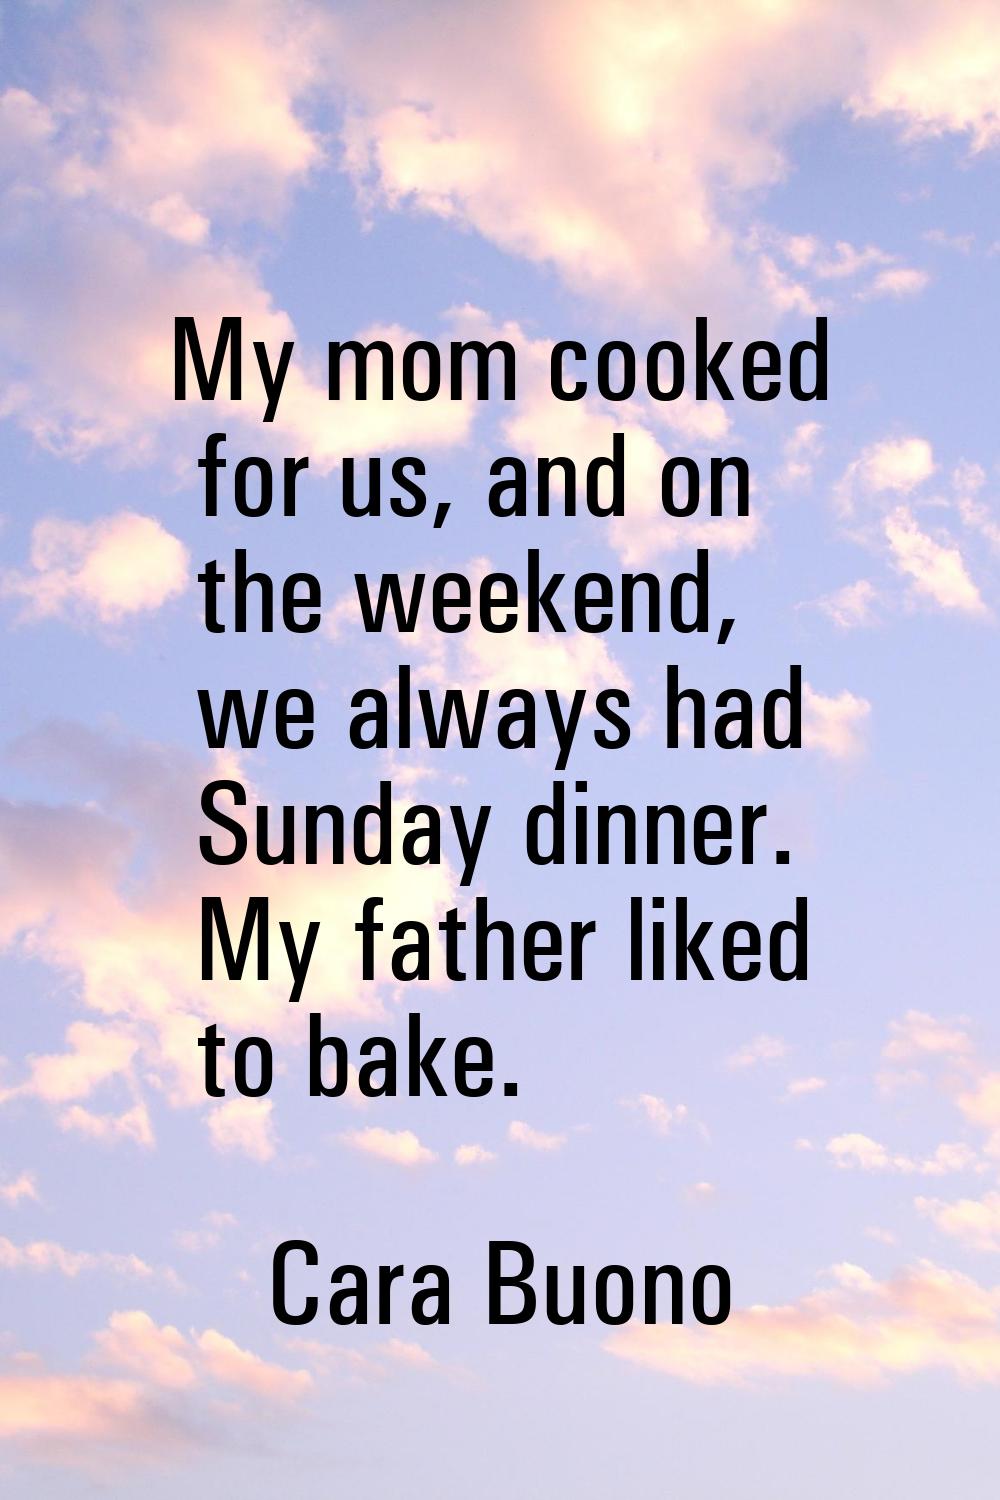 My mom cooked for us, and on the weekend, we always had Sunday dinner. My father liked to bake.